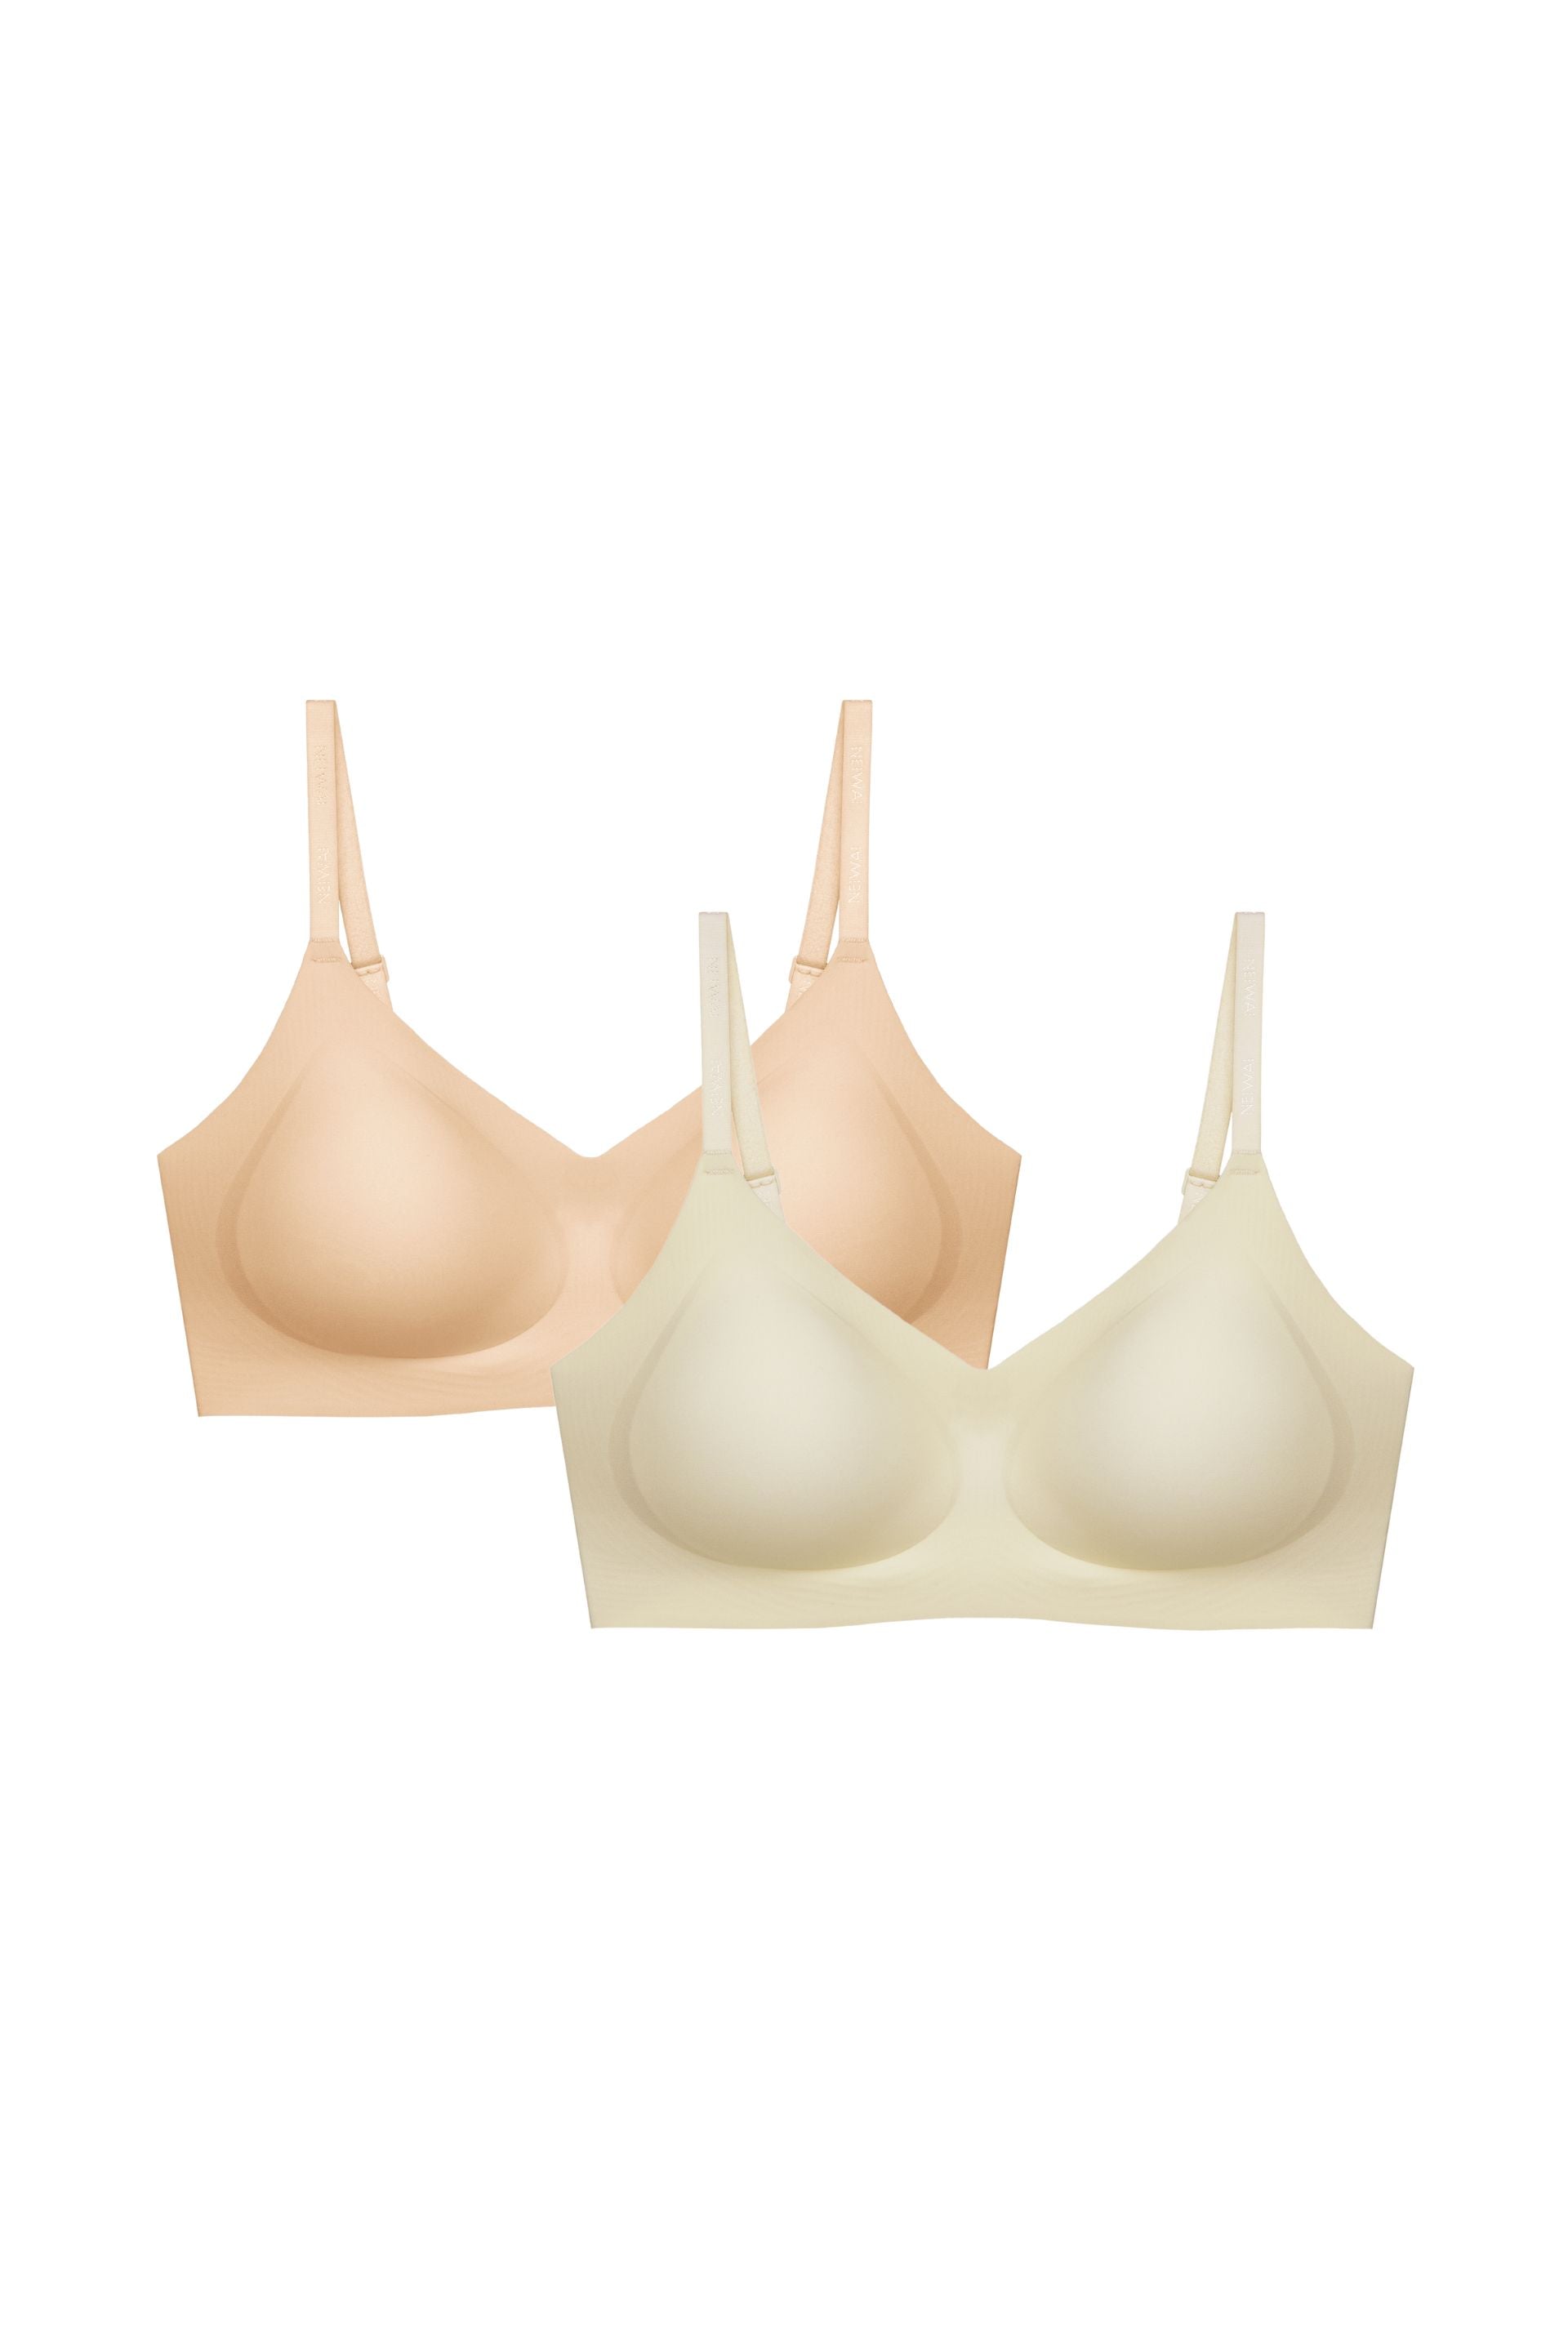 Classic, Seamless Bra, Everyday Seamless Bra What All Women Desire for（Grey  Style） (L 34B 34C 34D 36A, Black/Beige/Grey) at  Women's Clothing  store